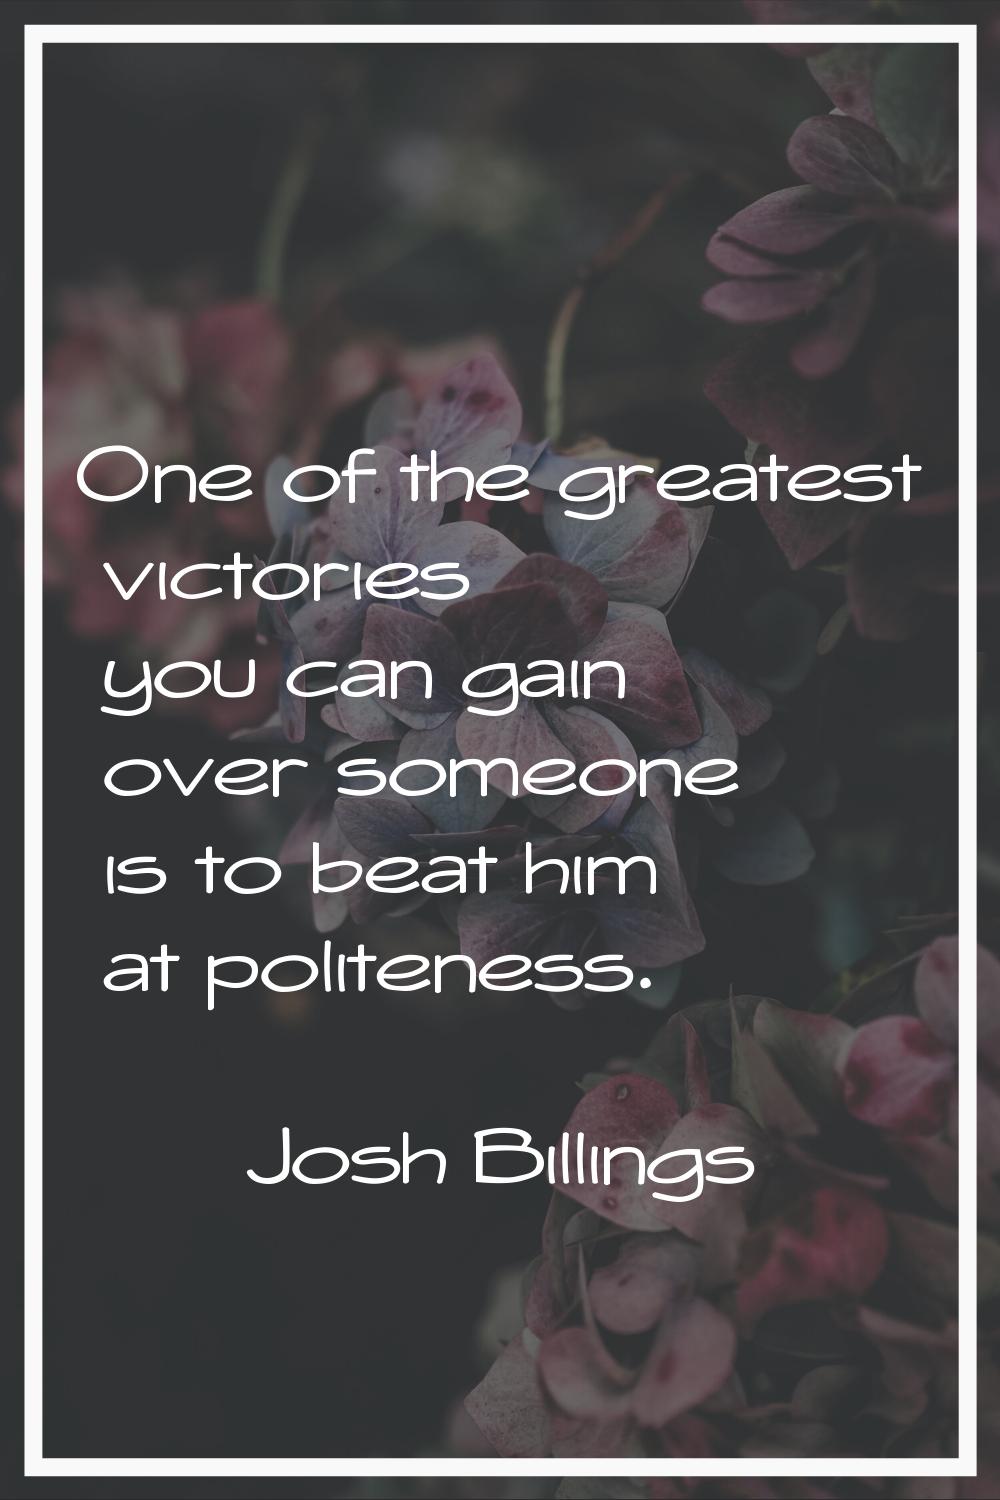 One of the greatest victories you can gain over someone is to beat him at politeness.